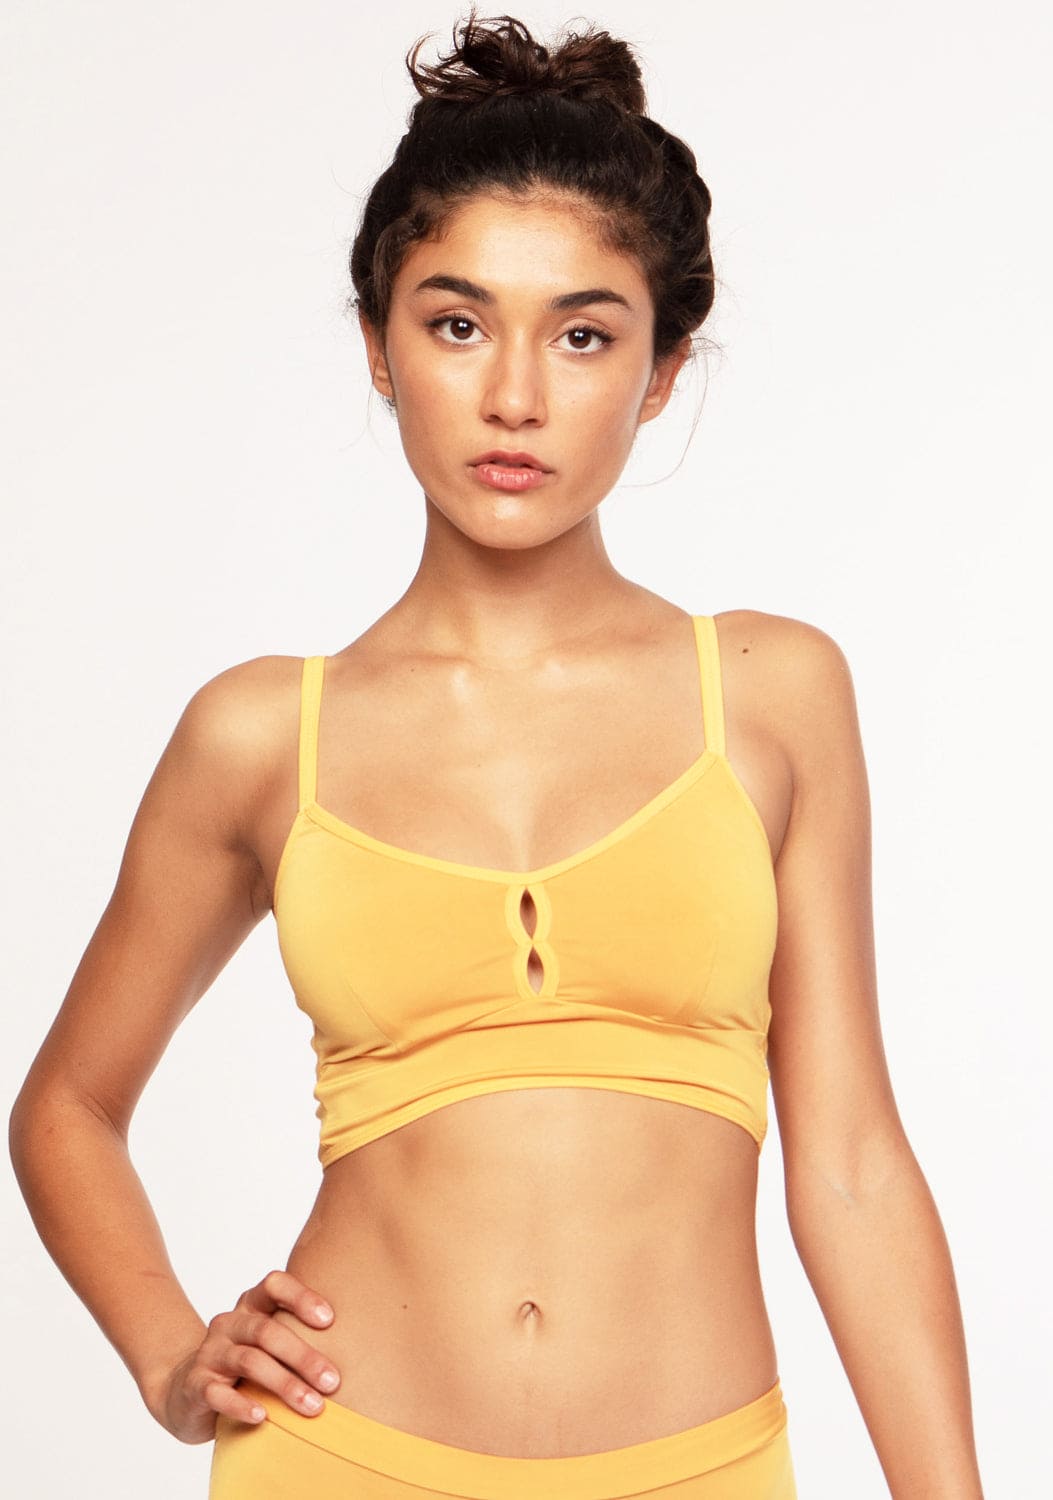 Classic bralet - Solid Colors - Cameo Clothing Line